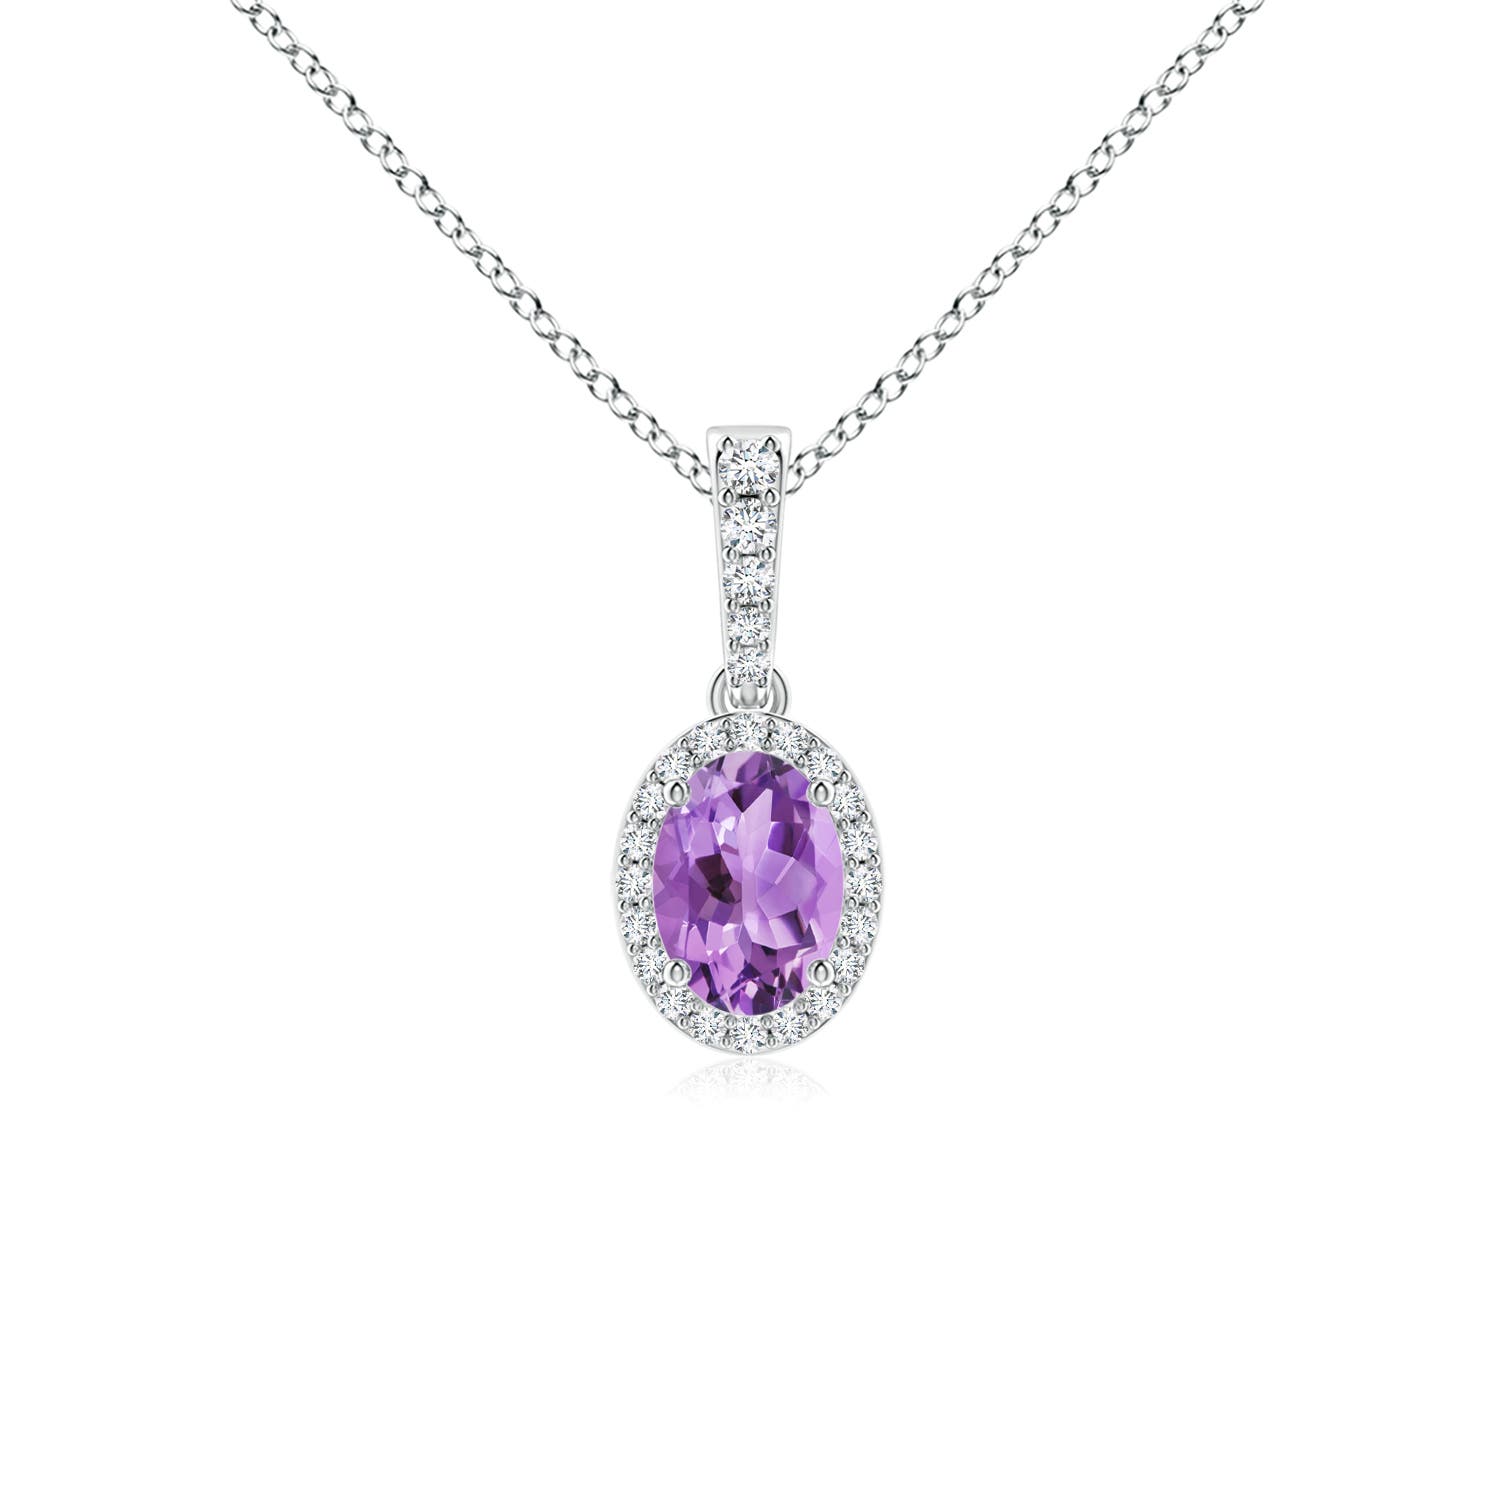 A - Amethyst / 0.84 CT / 14 KT White Gold